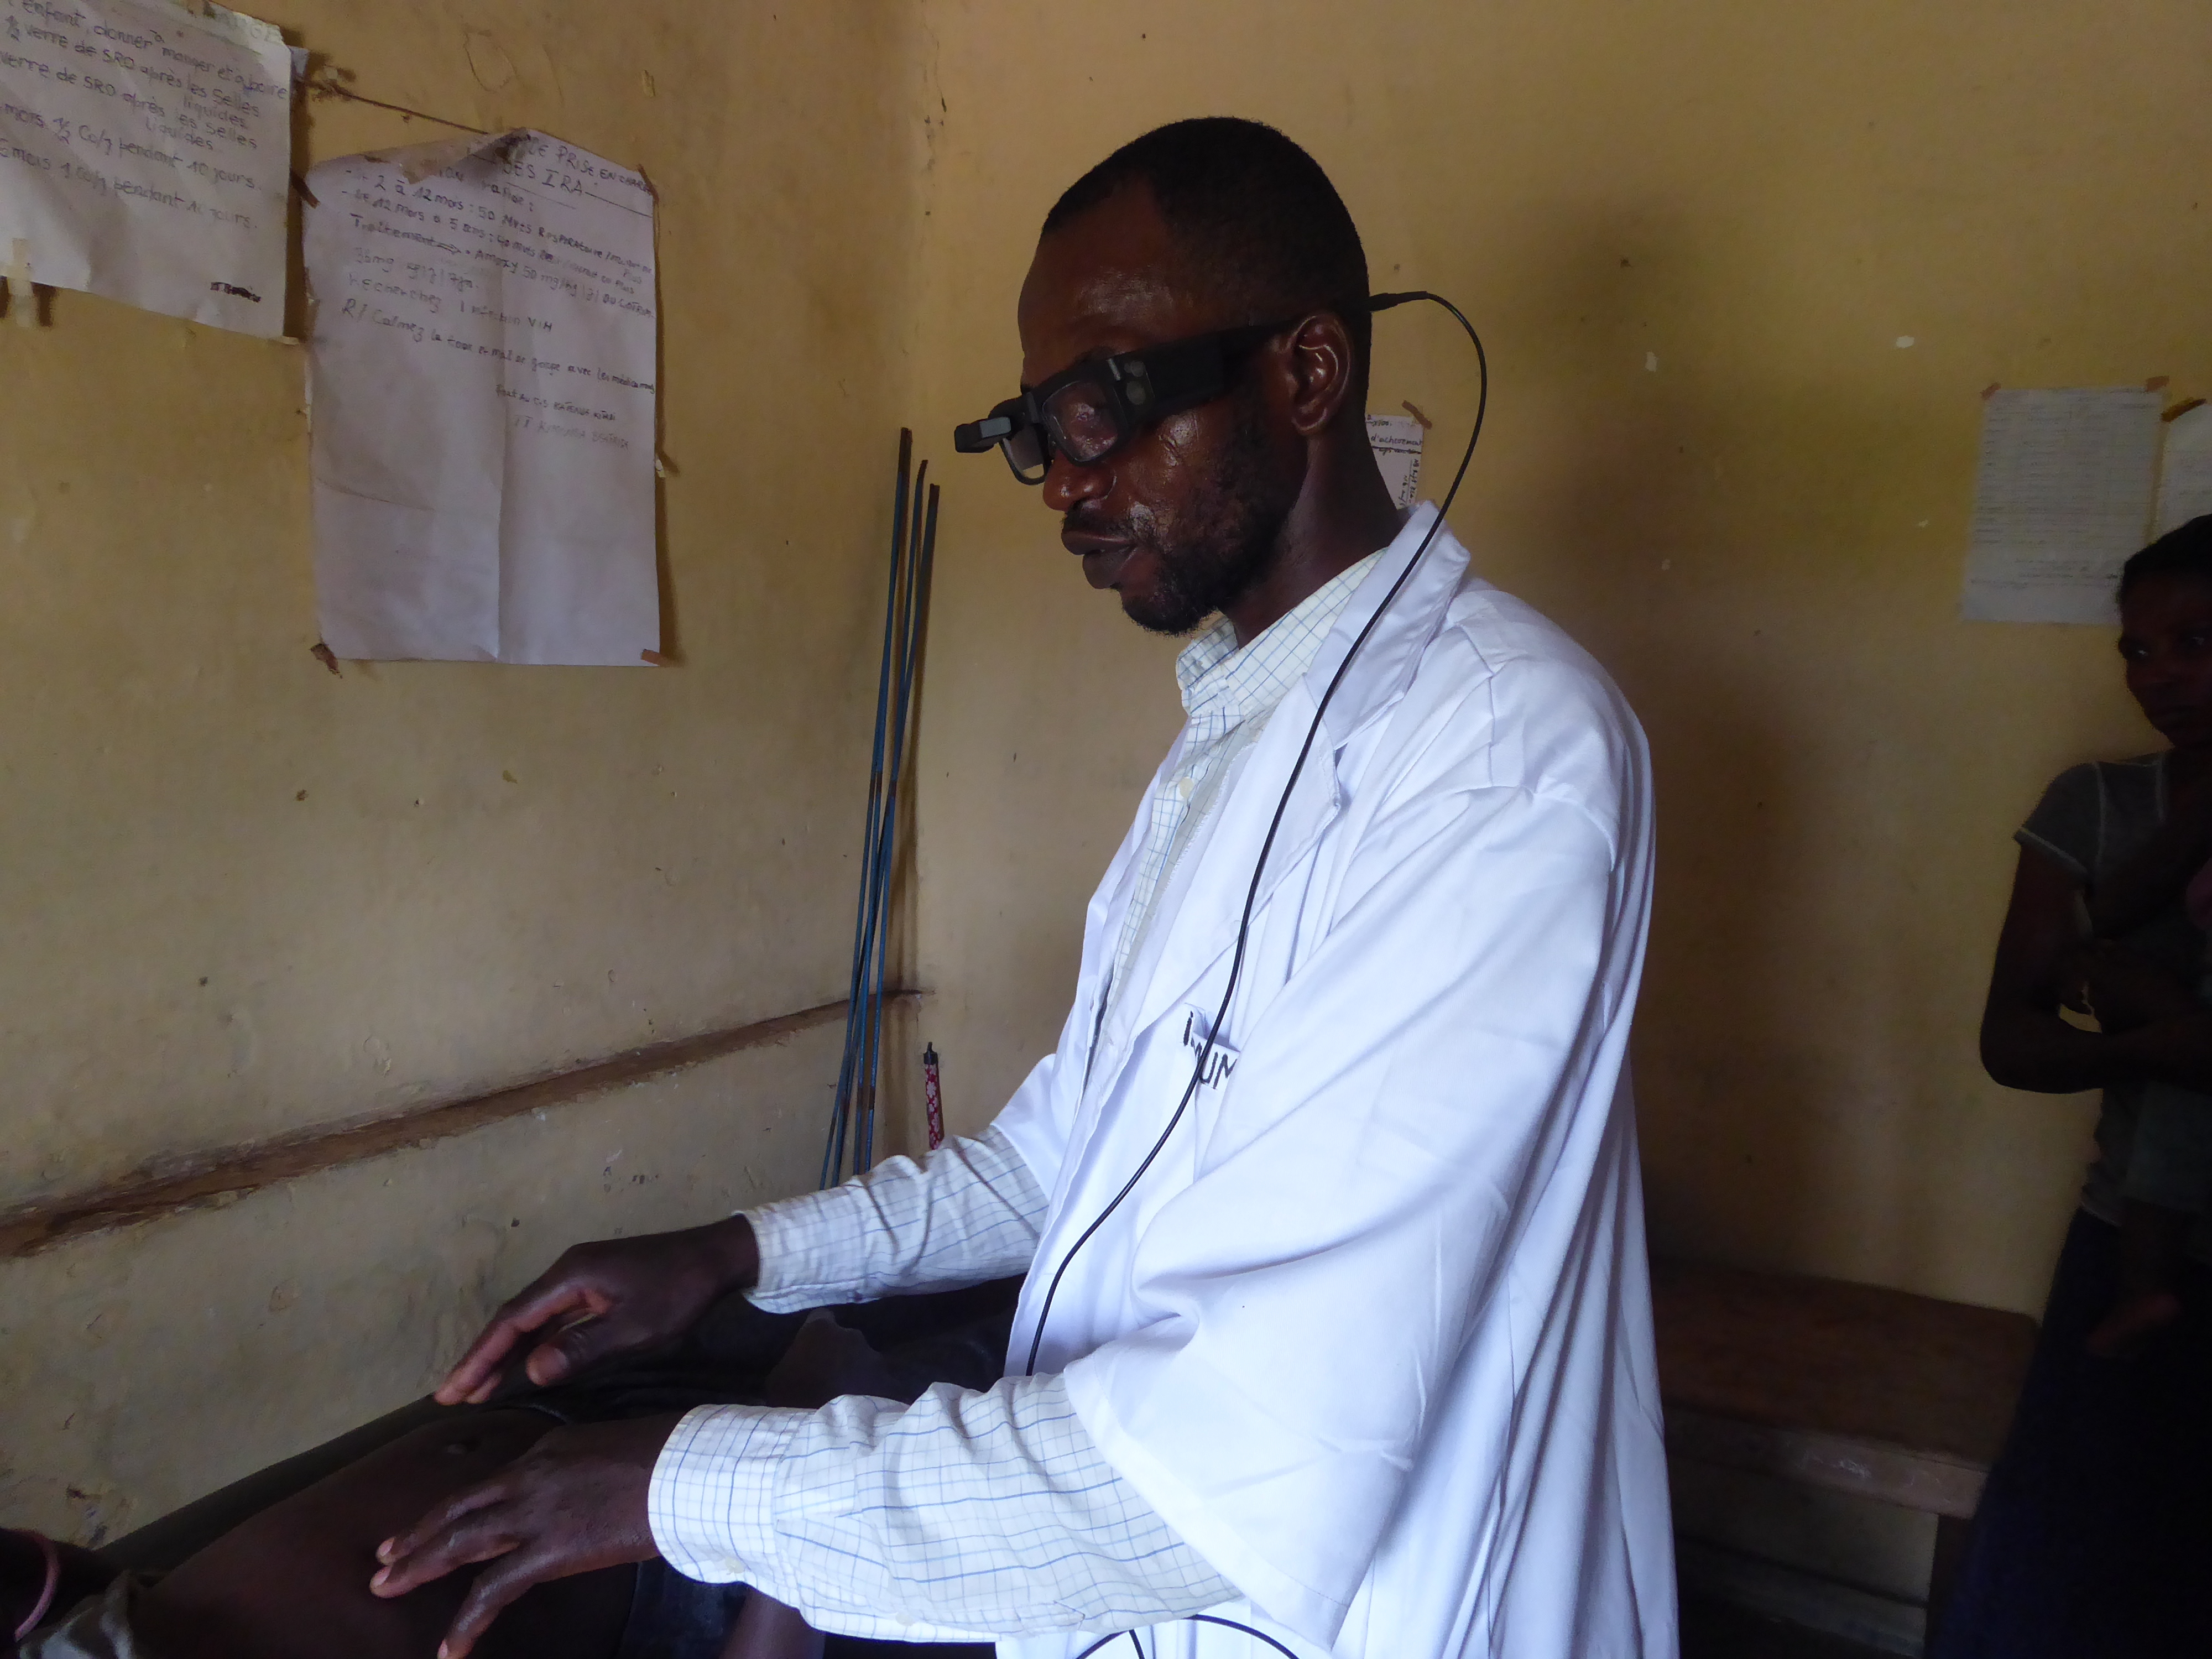 Nurse at Kigandu health center wearing smart glasses to examine a patient